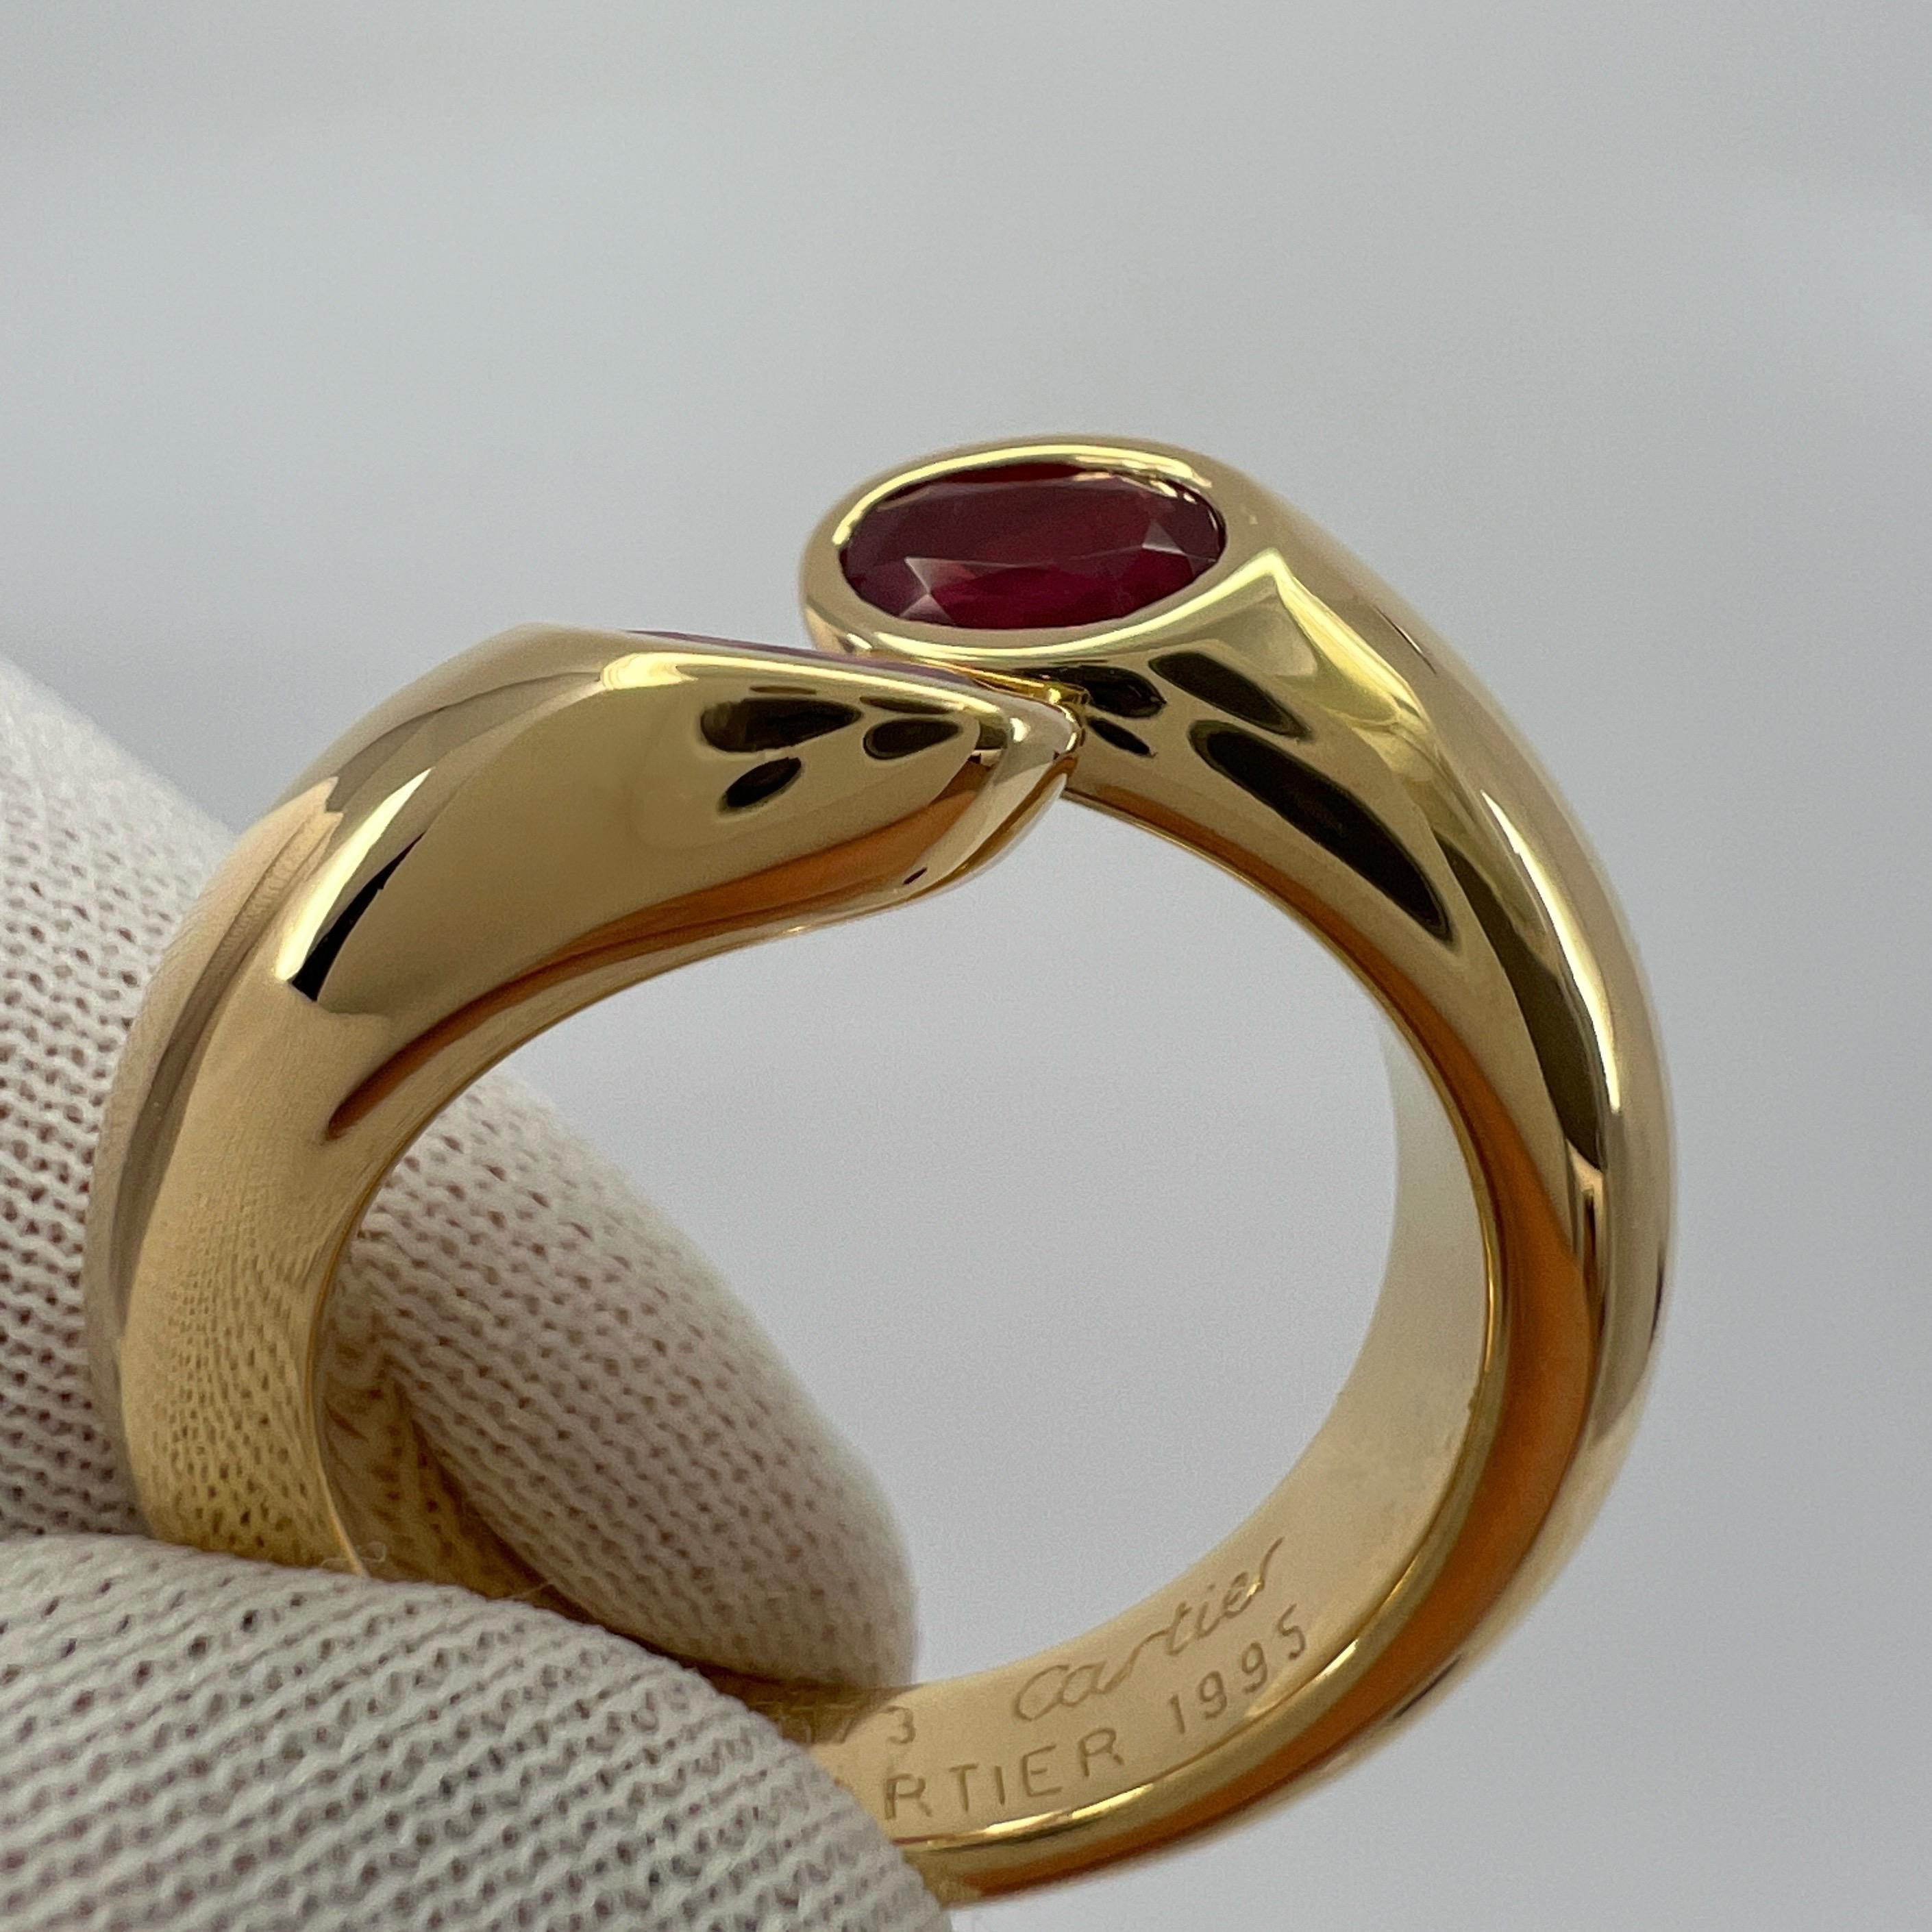 Rare Vintage Cartier Red Ruby Ellipse Oval Cut 18k Gold Bypass Split Ring 6.5 52 2